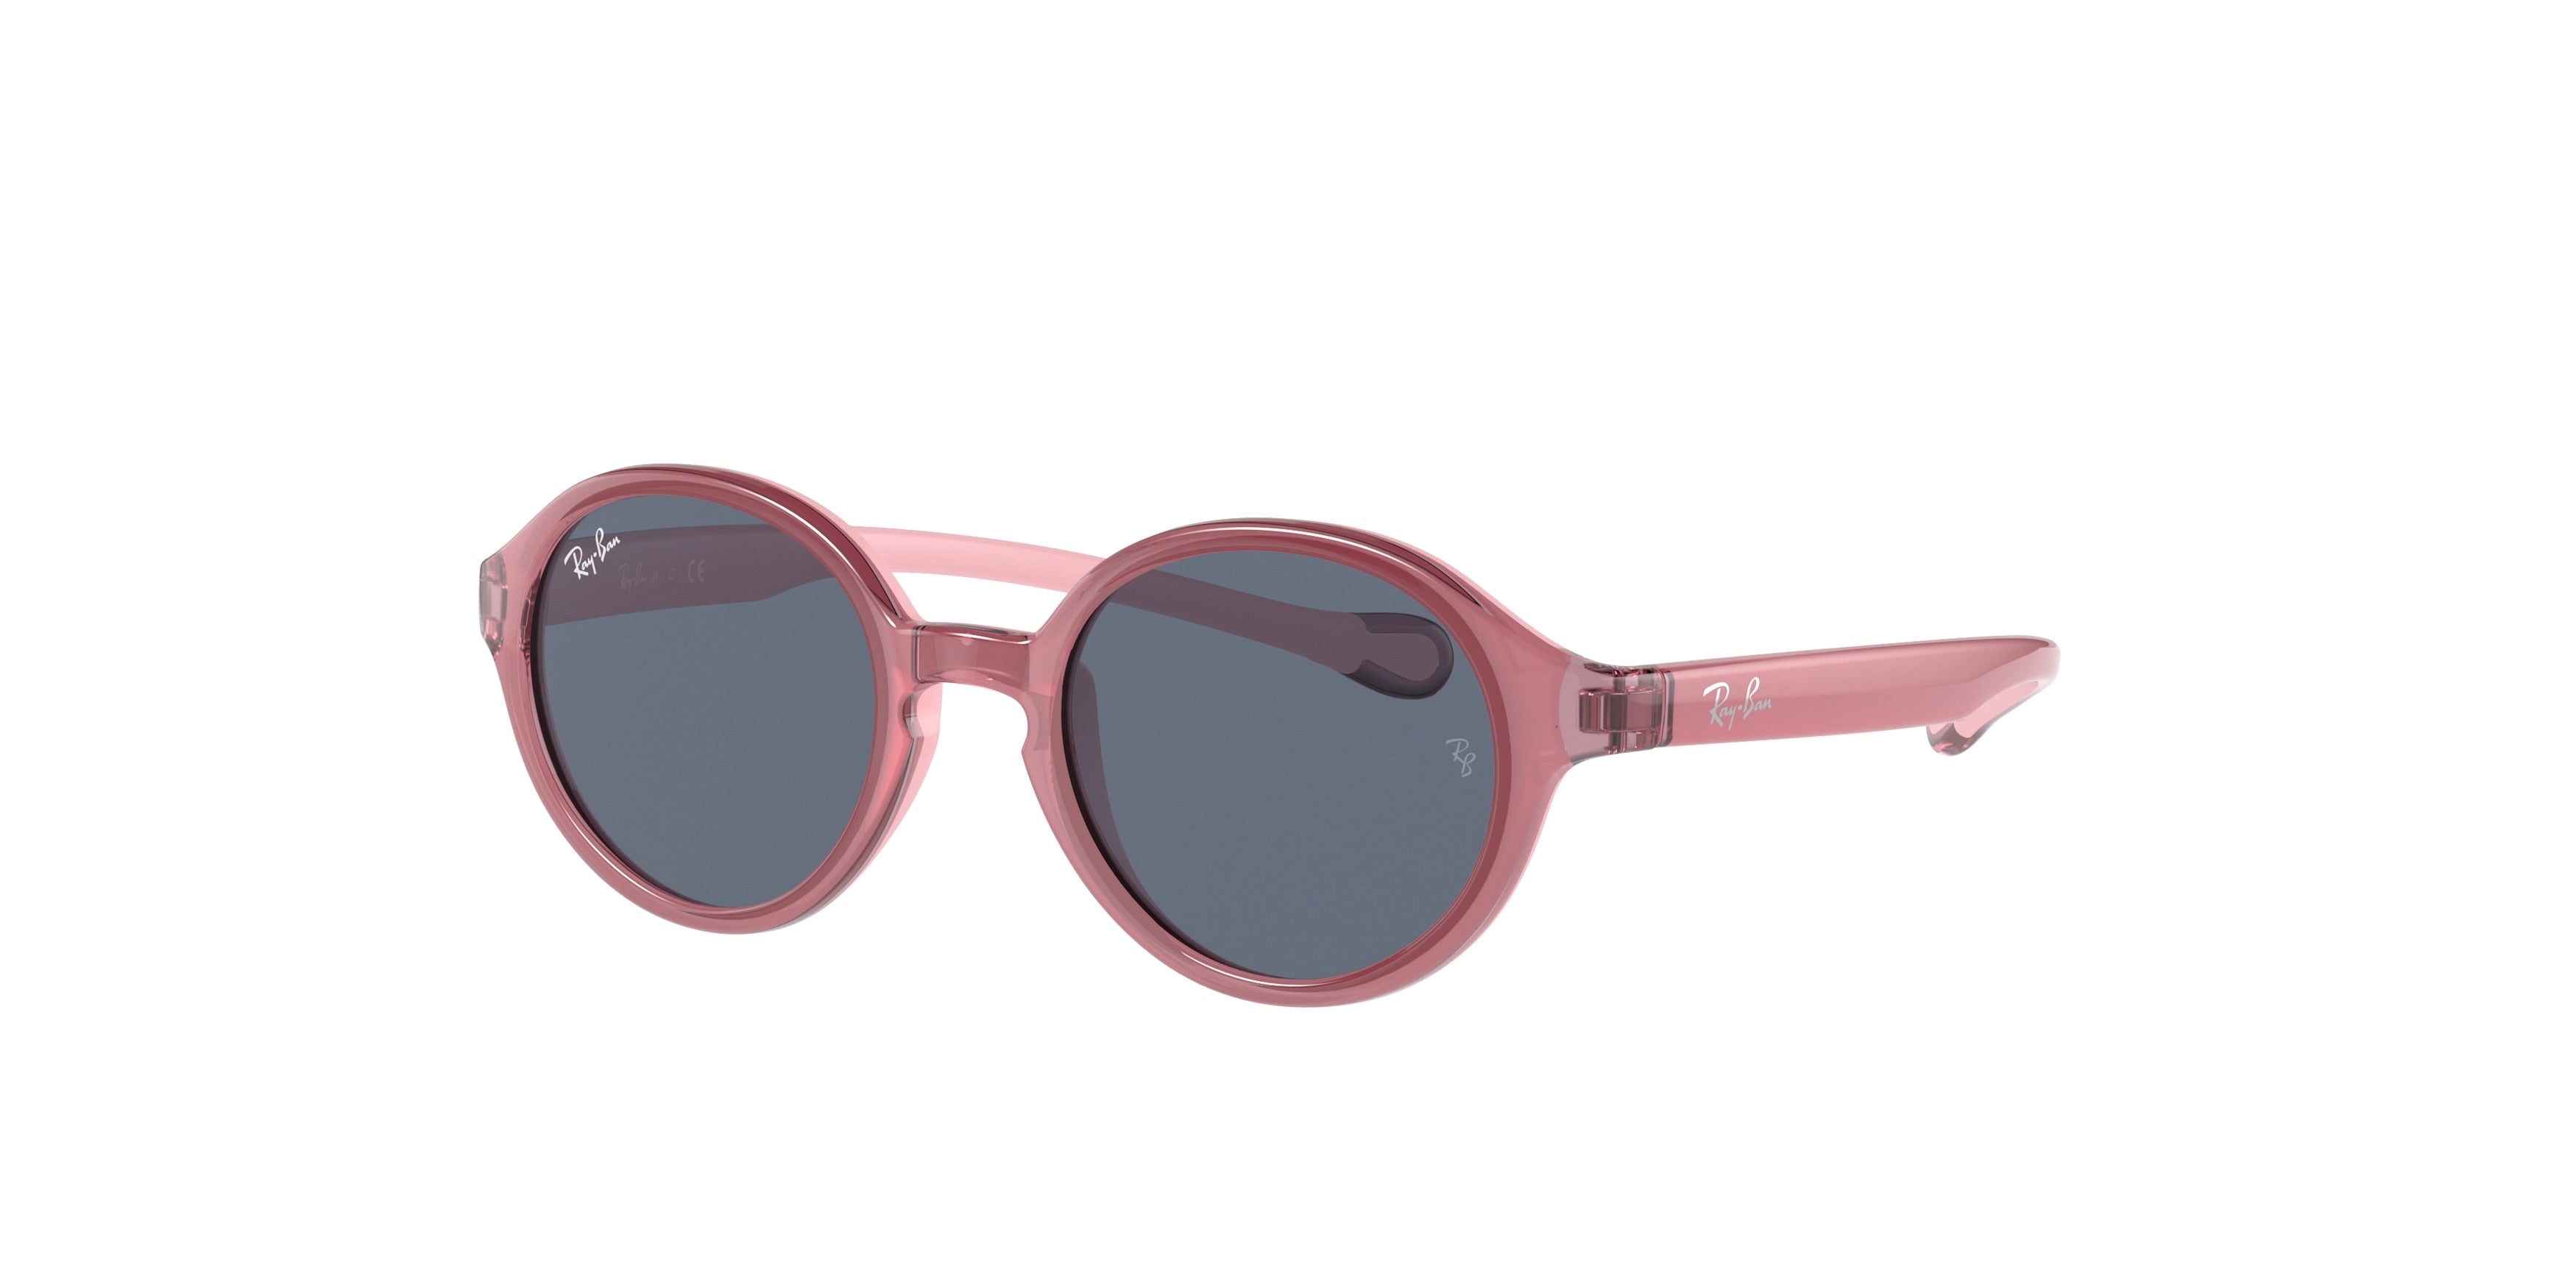 Ray-Ban Junior RJ9075S Phantos Sunglasses  709887-Fuxia On Pink 39-130-16 - Color Map Pink